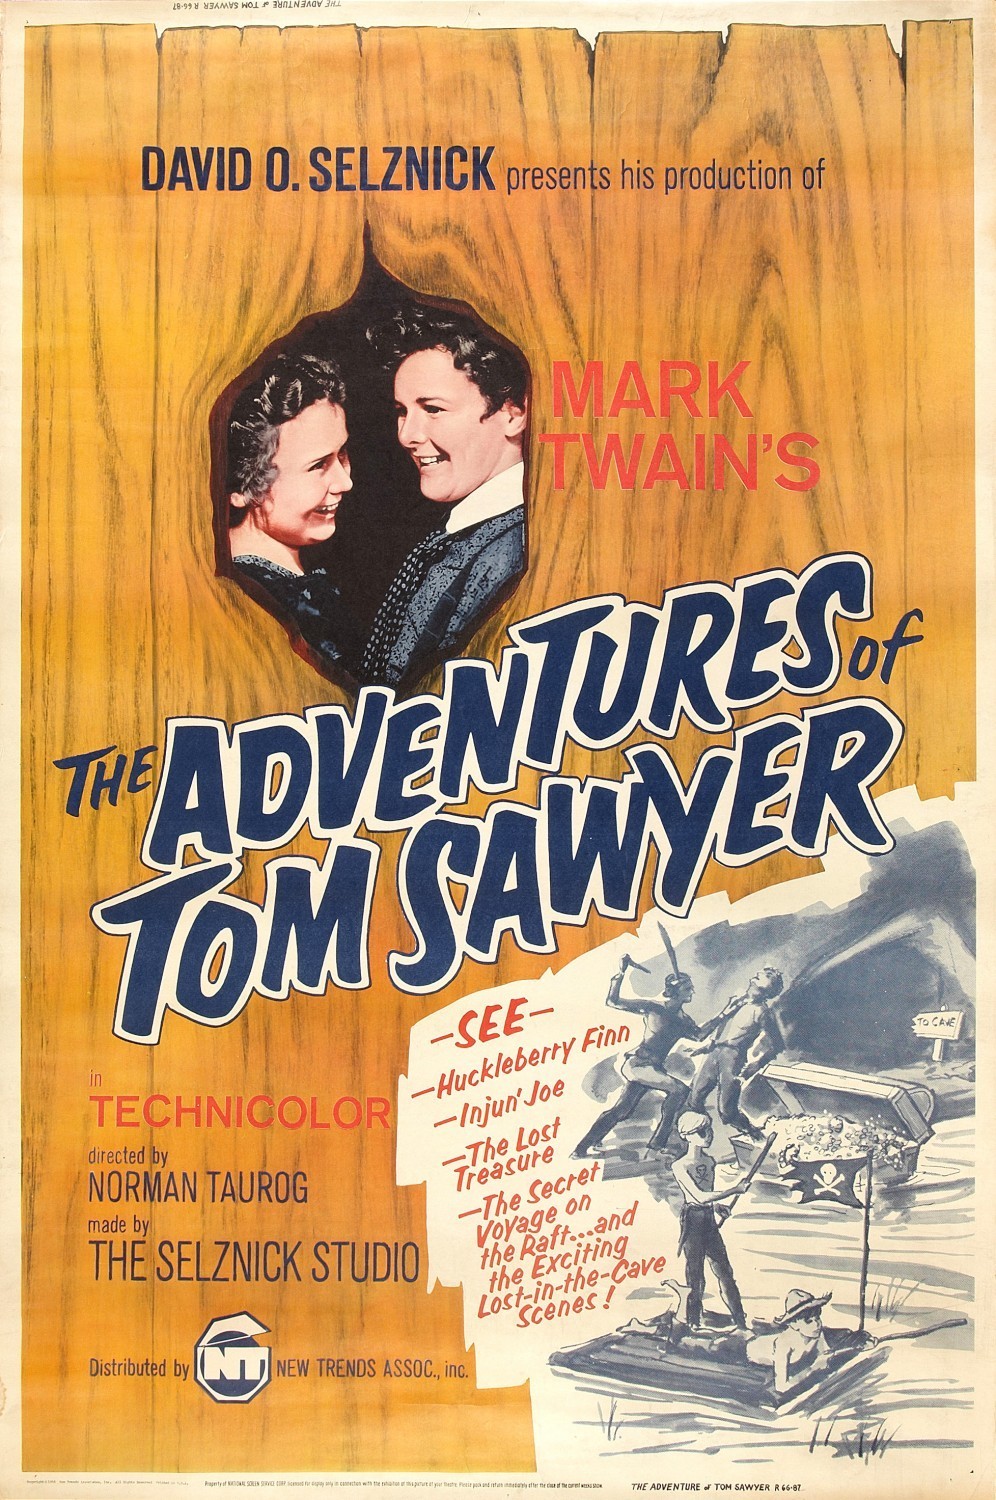 Poster for the movie "The Adventures of Tom Sawyer"